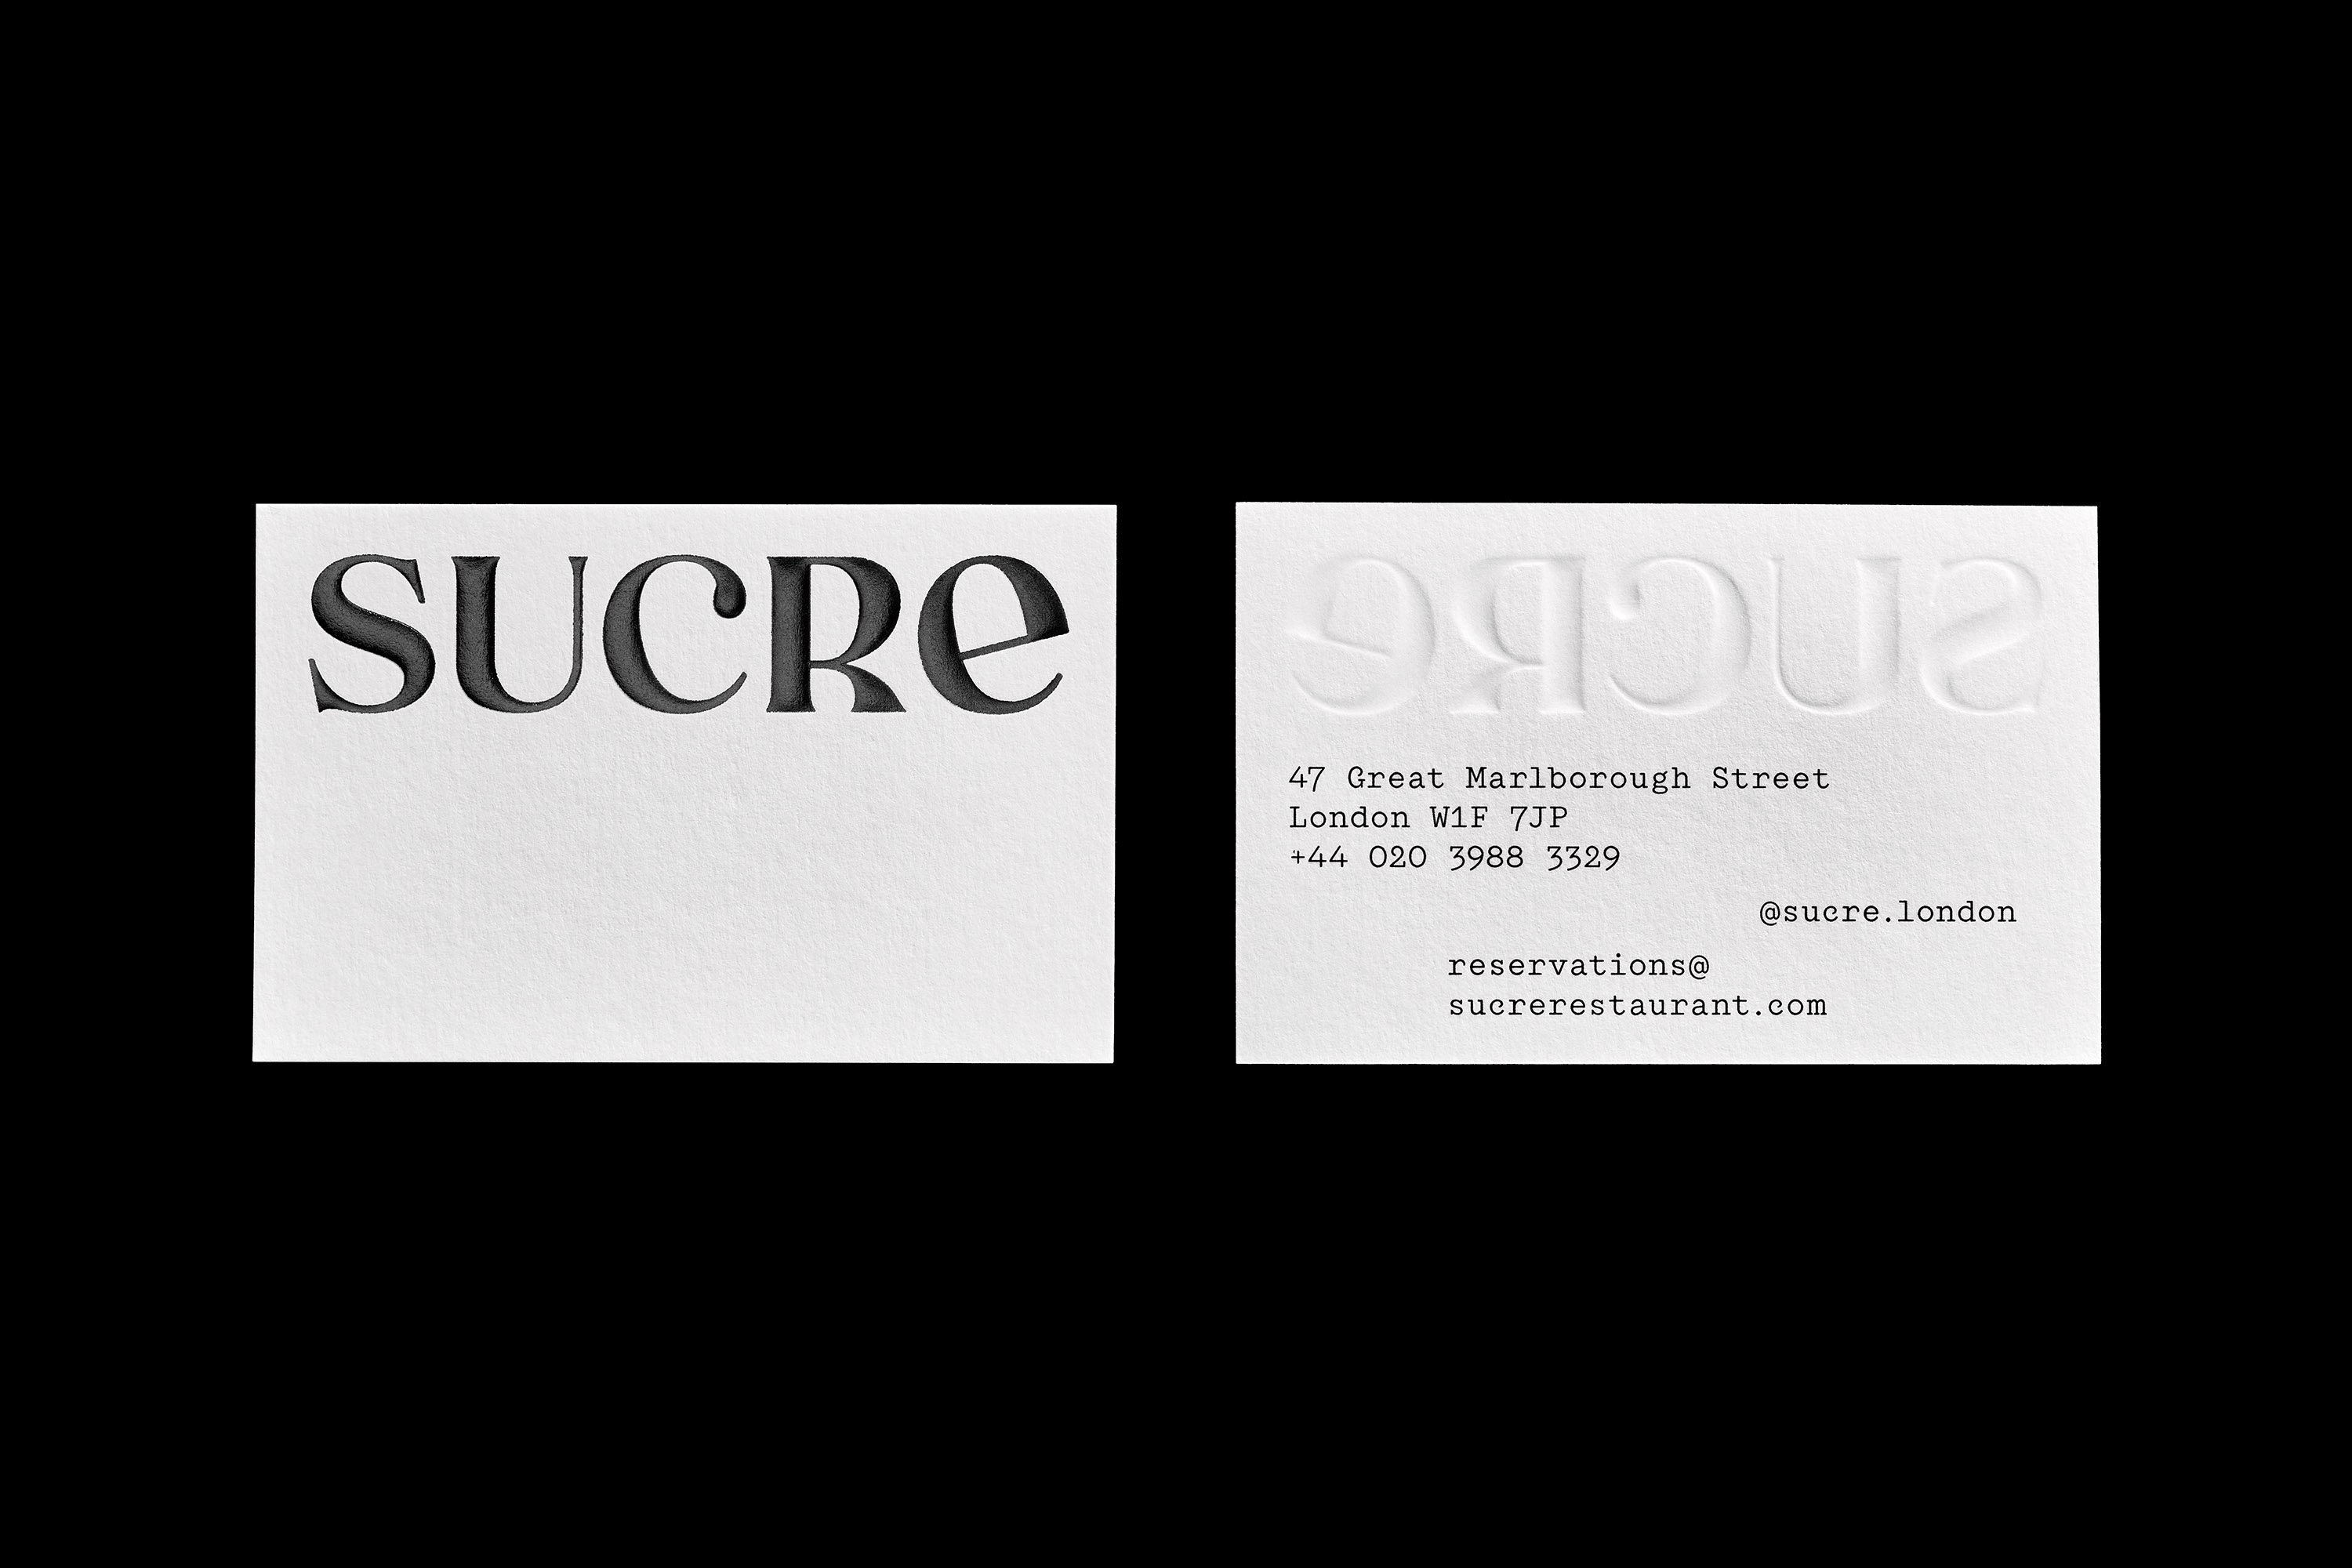 Logotype and business card designed by Dutchscot for London-based Argentinian restaurant Sucre and Abajo